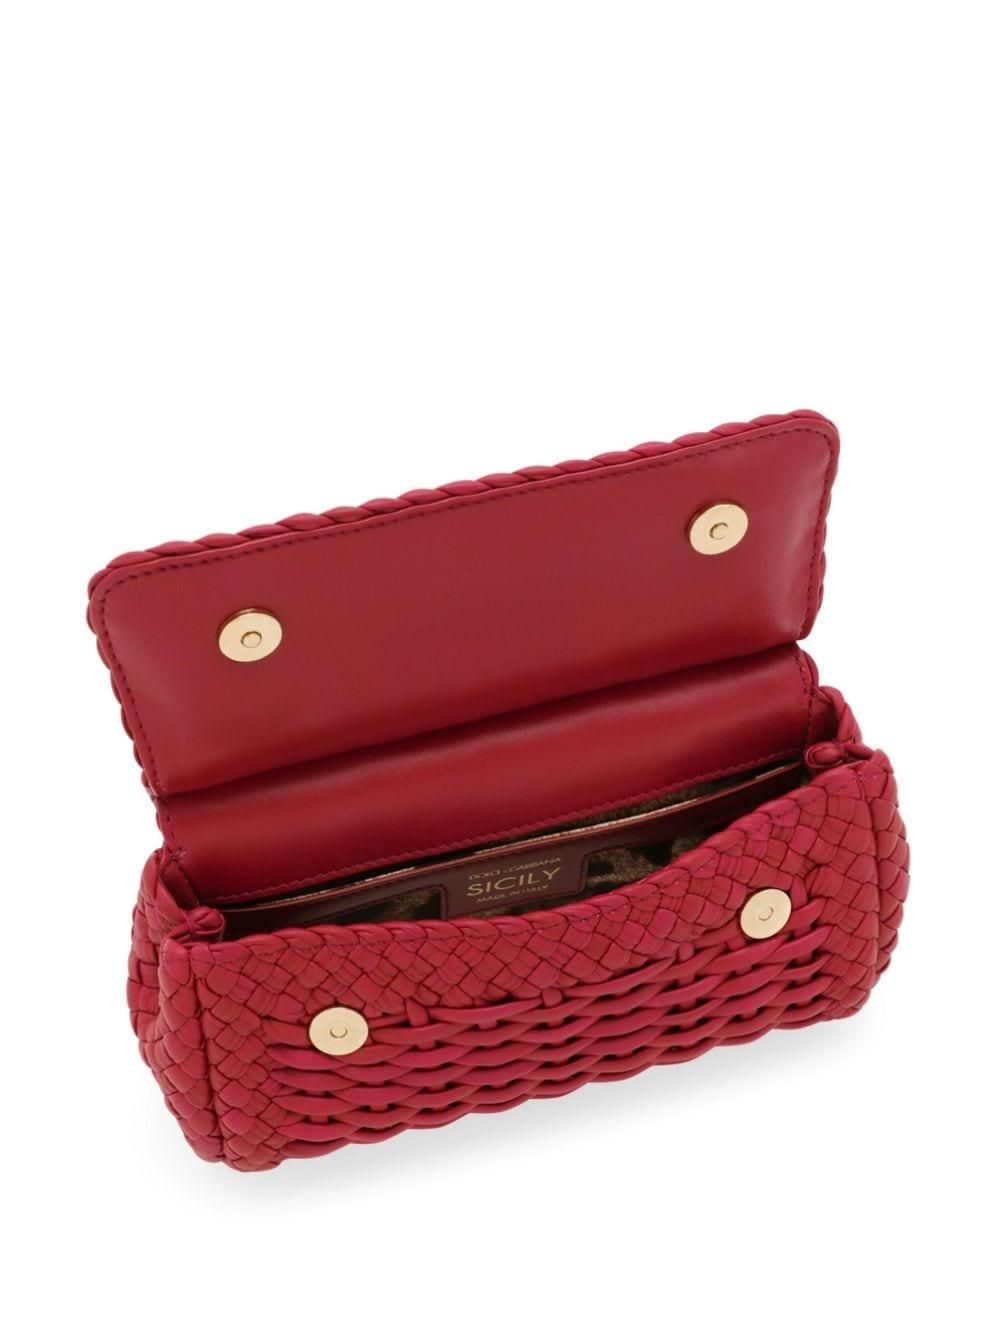 Dolce & Gabbana Small Sicily Shoulder Bag in Red | Lyst